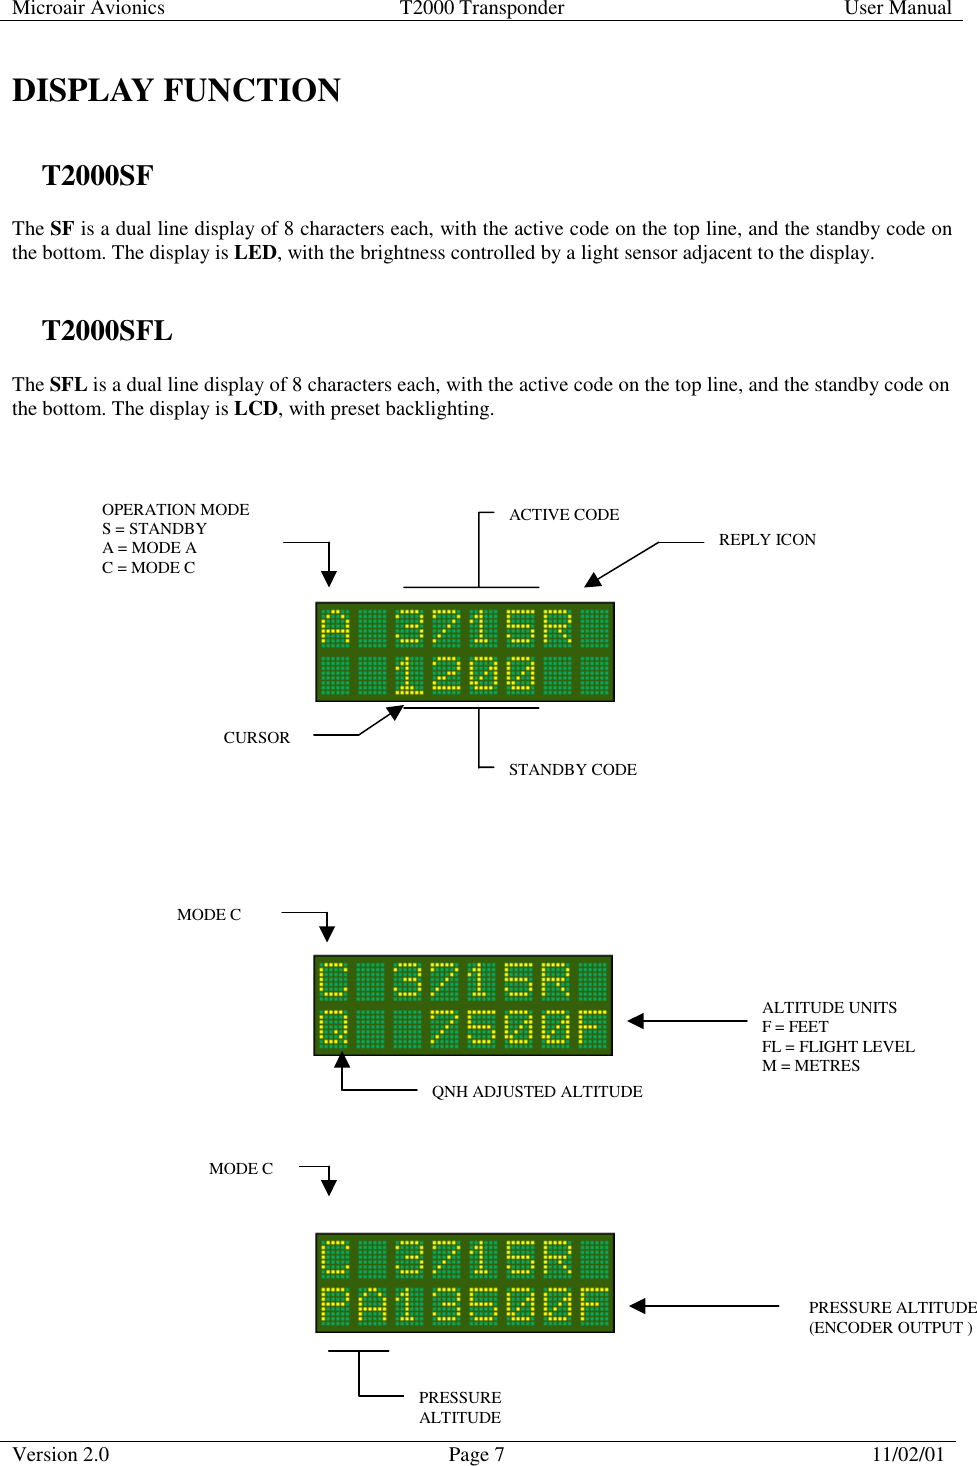 Microair Avionics  T2000 Transponder  User Manual  Version 2.0  Page 7  11/02/01     DISPLAY FUNCTION T2000SF The SF is a dual line display of 8 characters each, with the active code on the top line, and the standby code on the bottom. The display is LED, with the brightness controlled by a light sensor adjacent to the display.  T2000SFL The SFL is a dual line display of 8 characters each, with the active code on the top line, and the standby code on the bottom. The display is LCD, with preset backlighting.                                          STANDBY CODE ACTIVE CODE OPERATION MODE S = STANDBY A = MODE A C = MODE C REPLY ICON CURSOR MODE C QNH ADJUSTED ALTITUDE ALTITUDE UNITS F = FEET FL = FLIGHT LEVEL M = METRES PRESSURE ALTITUDE PRESSURE ALTITUDE (ENCODER OUTPUT ) MODE C 